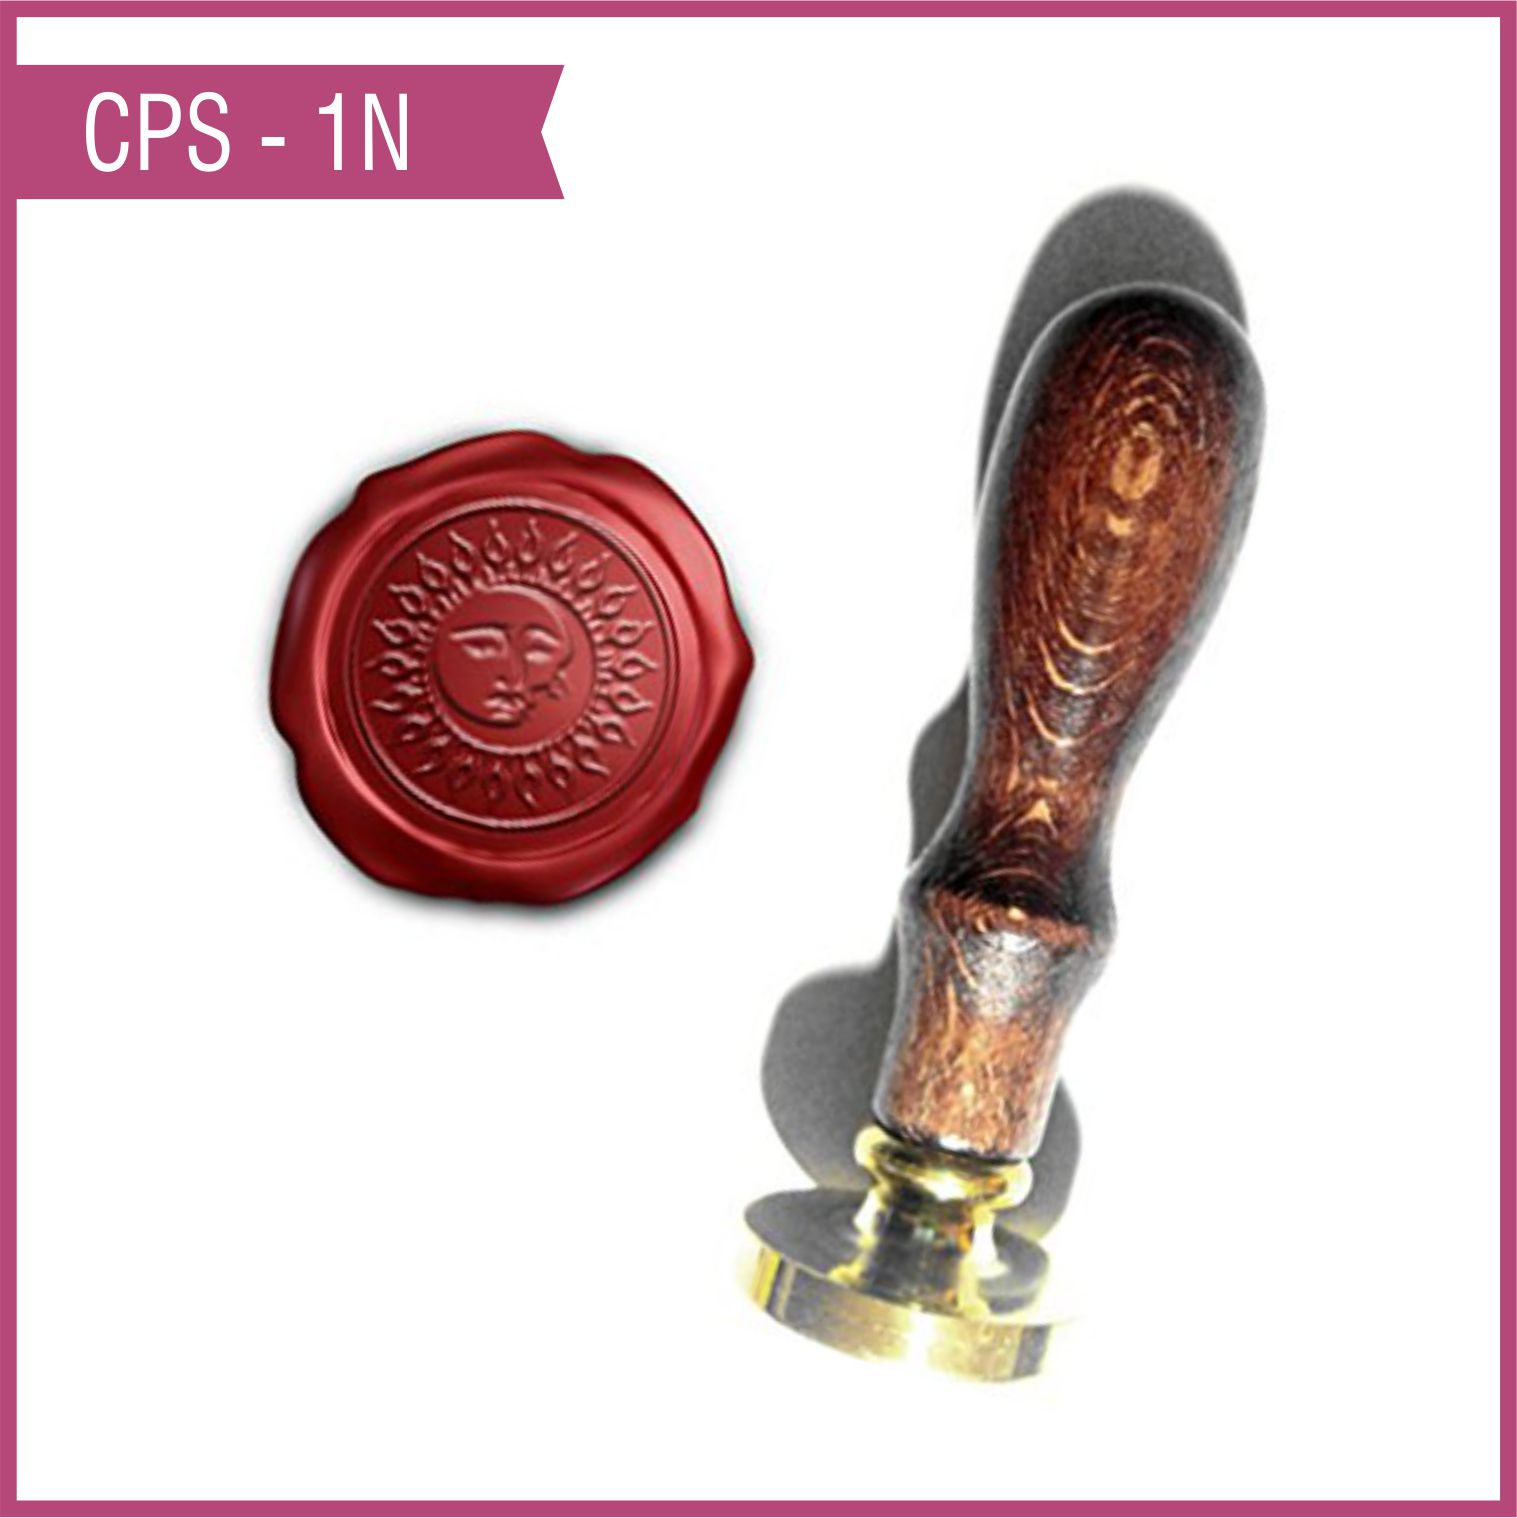 CPS - 1N - Rubber Stamp